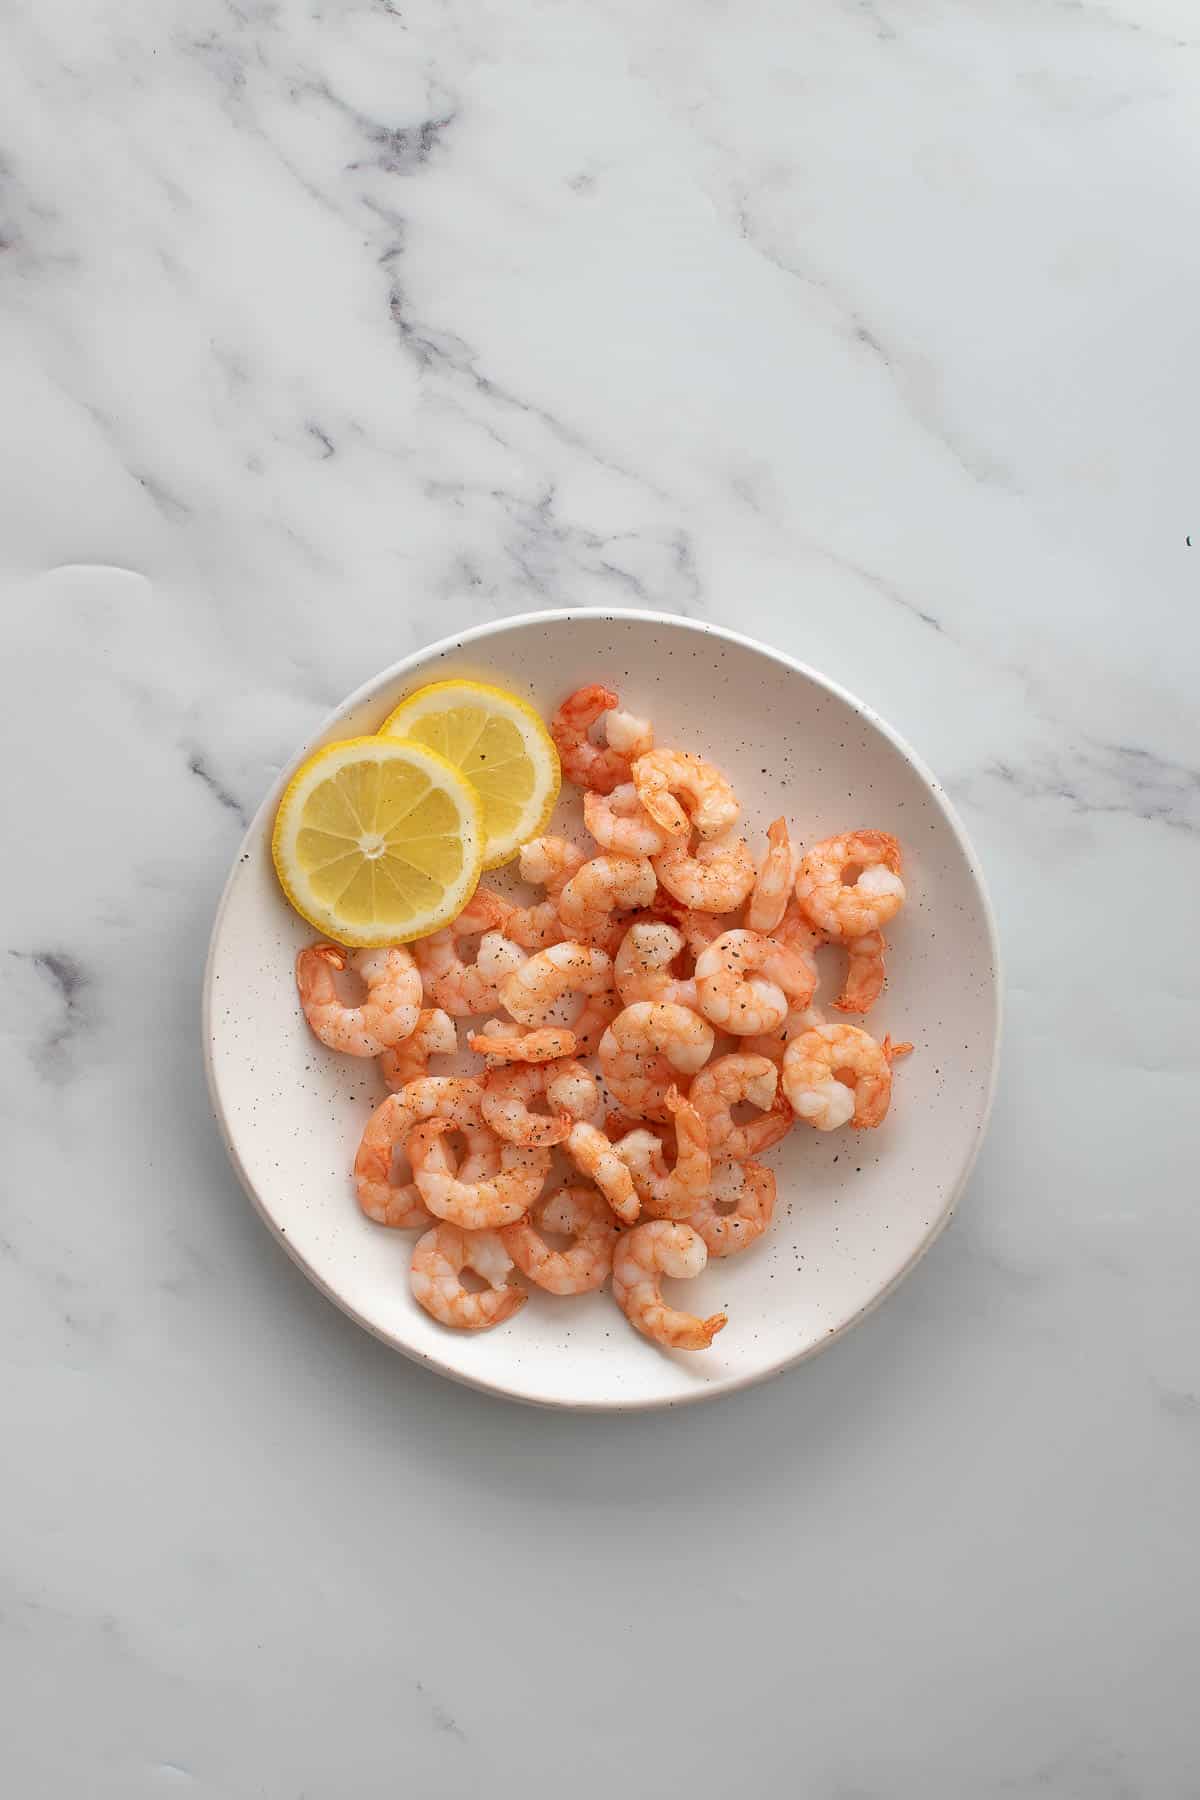 A plate of cooked shrimp with lemon slices.